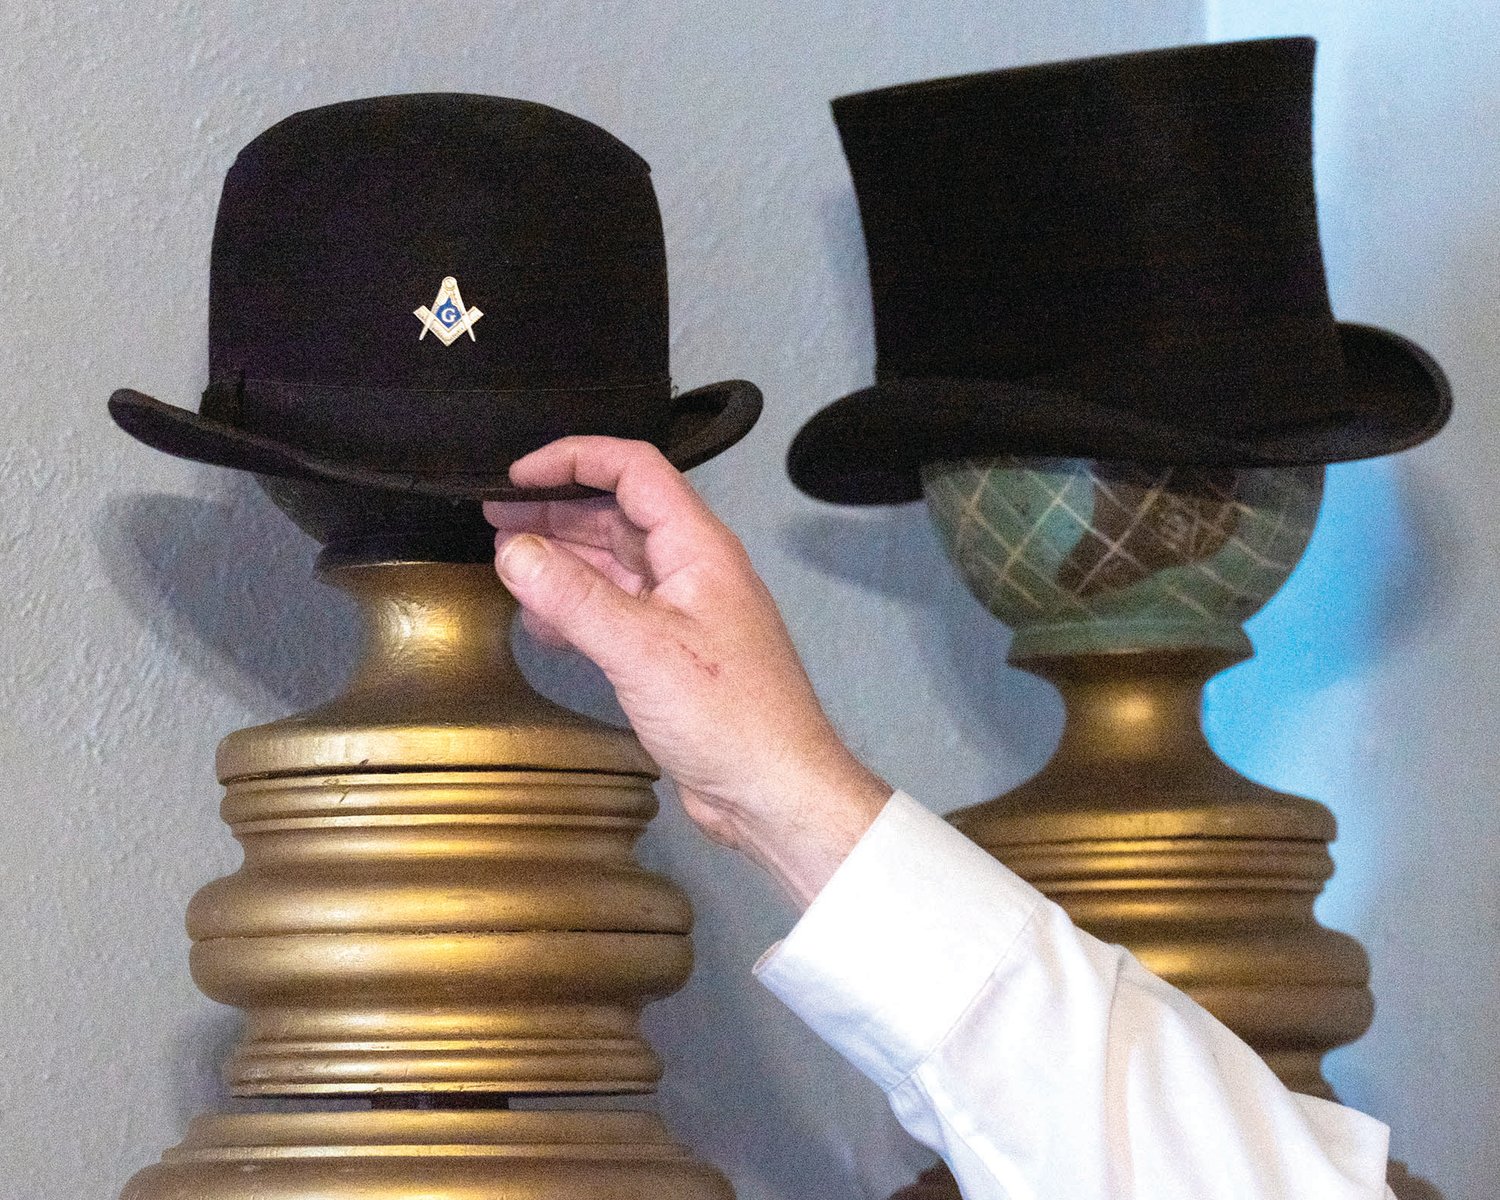 Hats sit on display inside the Masonic Temple in Centralia during a Saturday tour of the building.